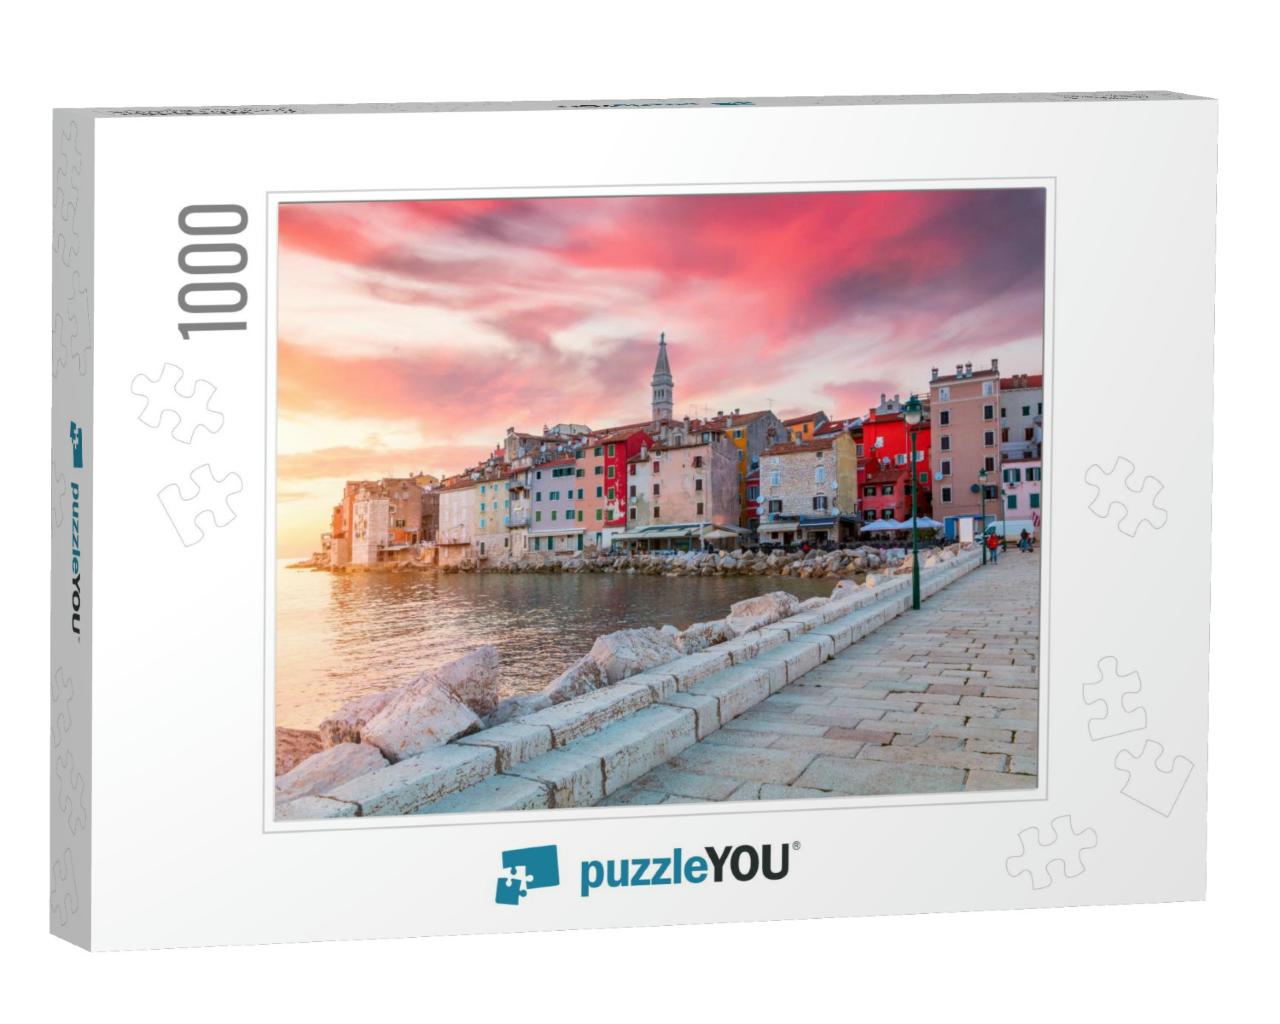 Rovinj Cozy Little Seaside Old Town with Harbor on the Is... Jigsaw Puzzle with 1000 pieces